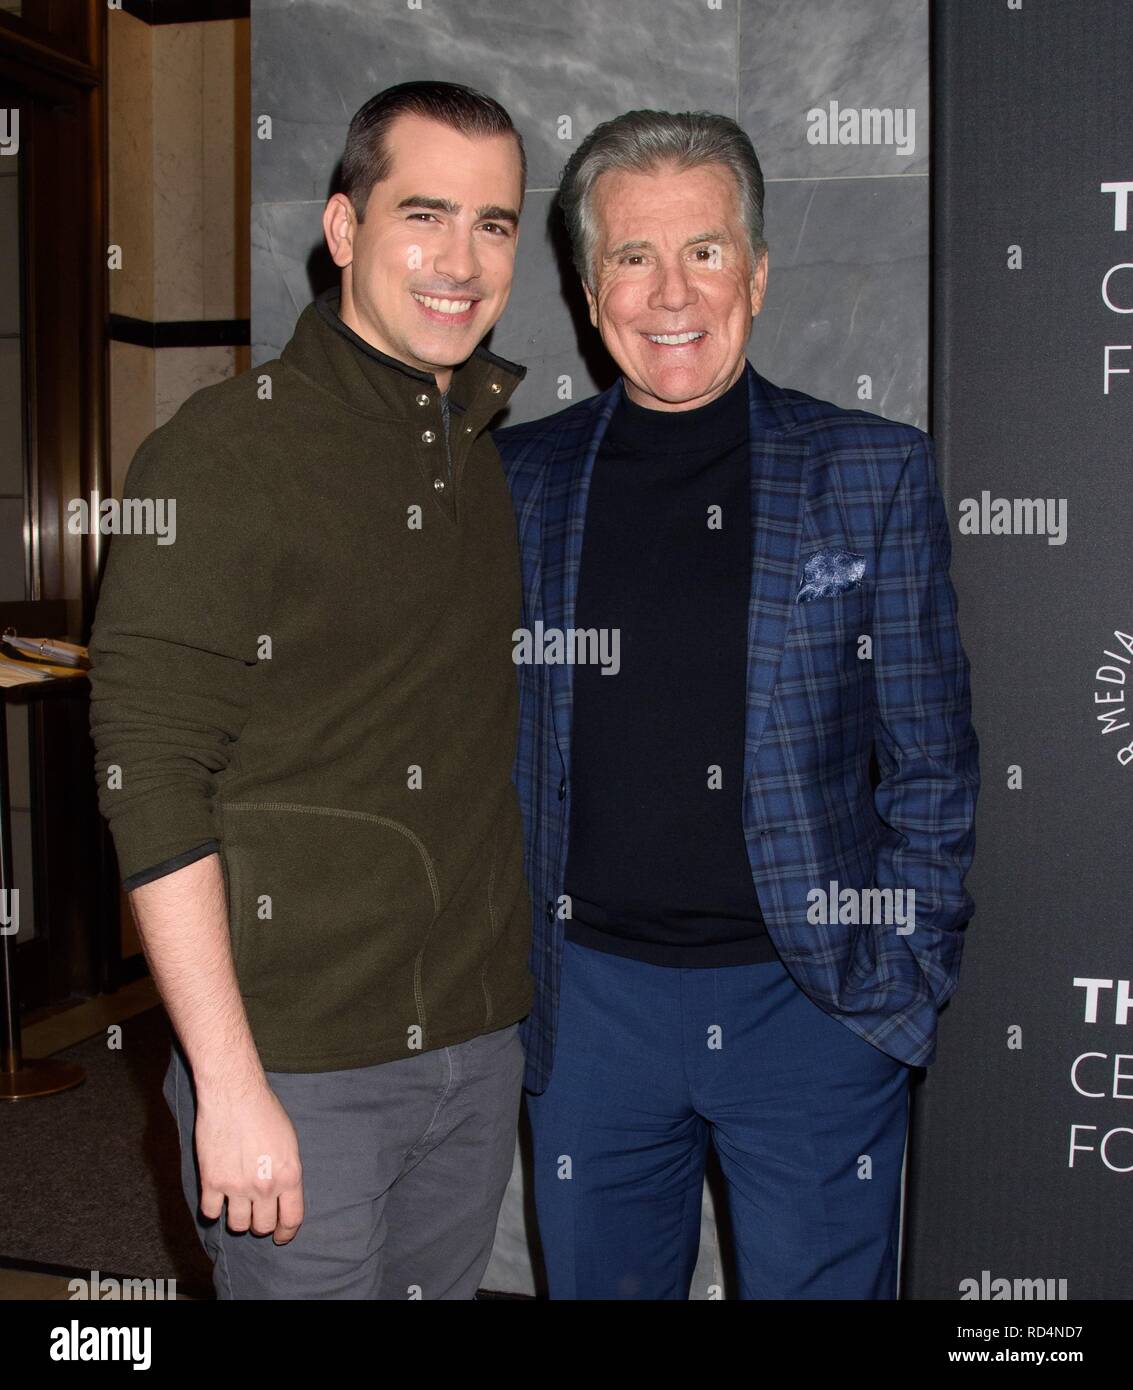 New York, NY, USA. 16th Jan, 2019. Callahan Walsh, John Walsh at arrivals for IN PURSUIT WITH JOHN WALSH Screening and Conversation, The Paley Center for Media, New York, NY January 16, 2019. Credit: RCF/Everett Collection/Alamy Live News Stock Photo